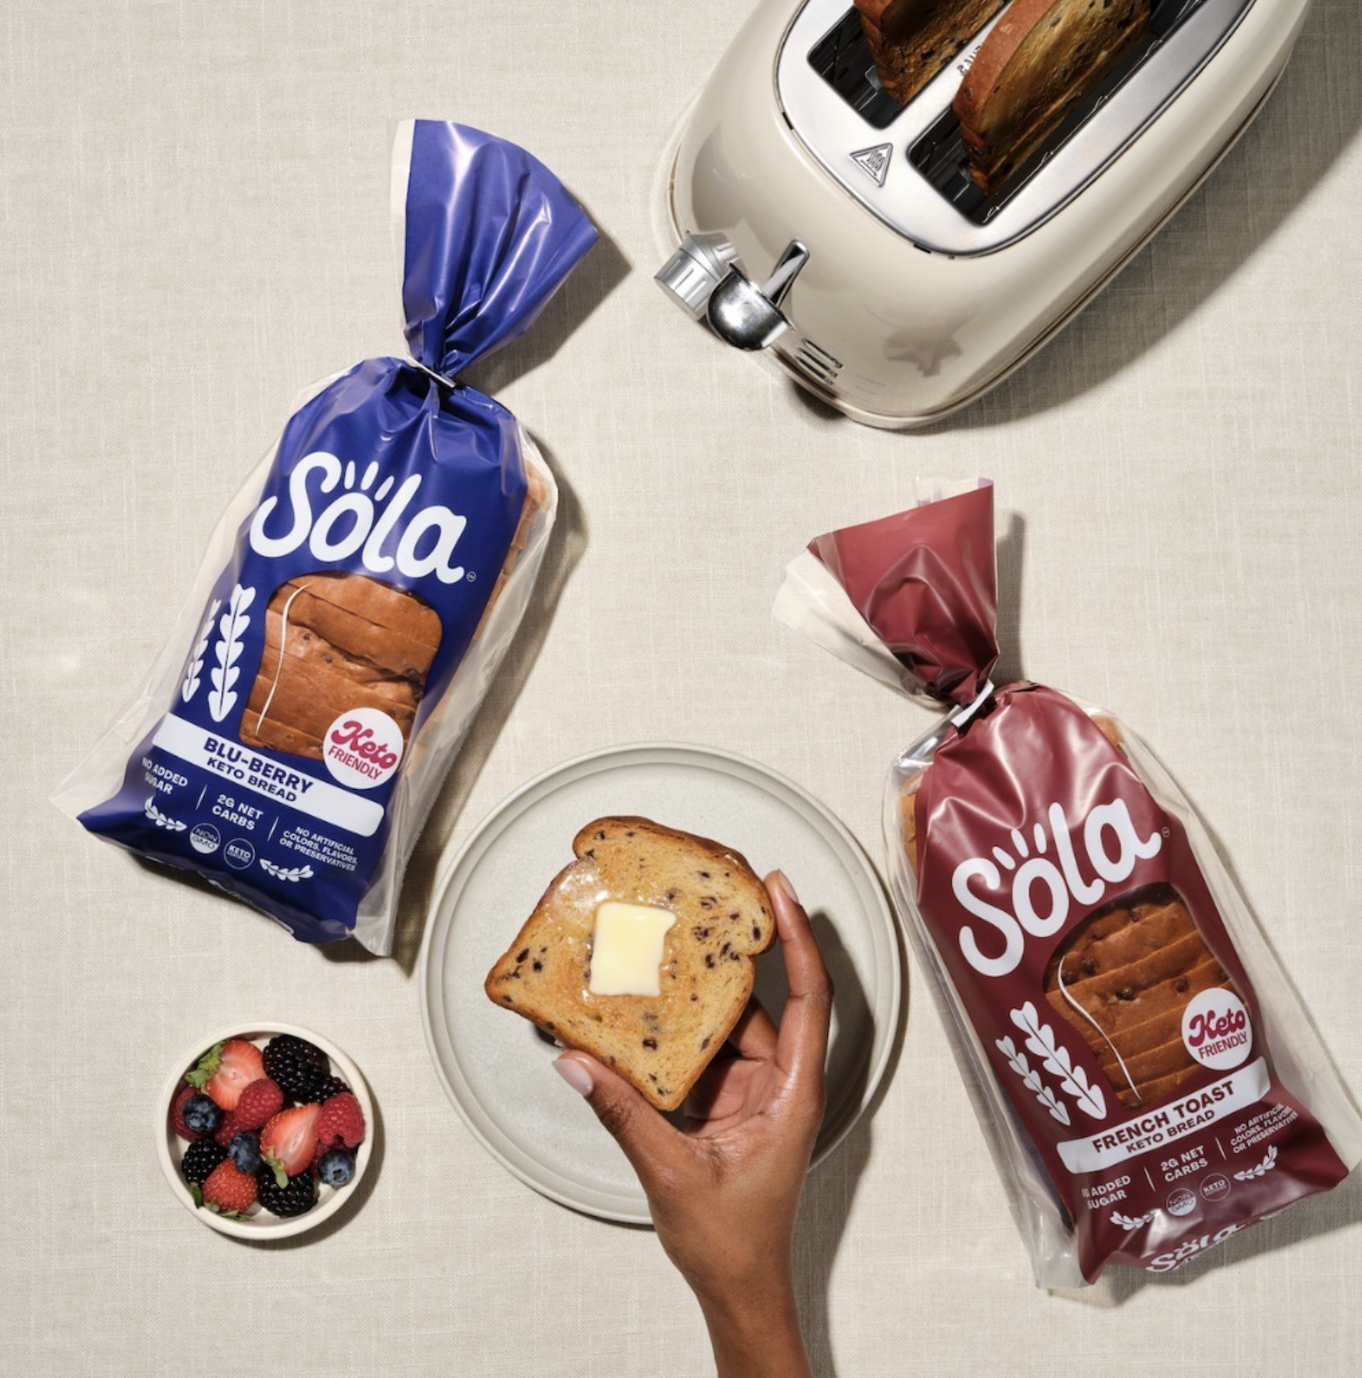 Model holding bread surrounded by two bread bags, a bowl of fruit, and a toaster.